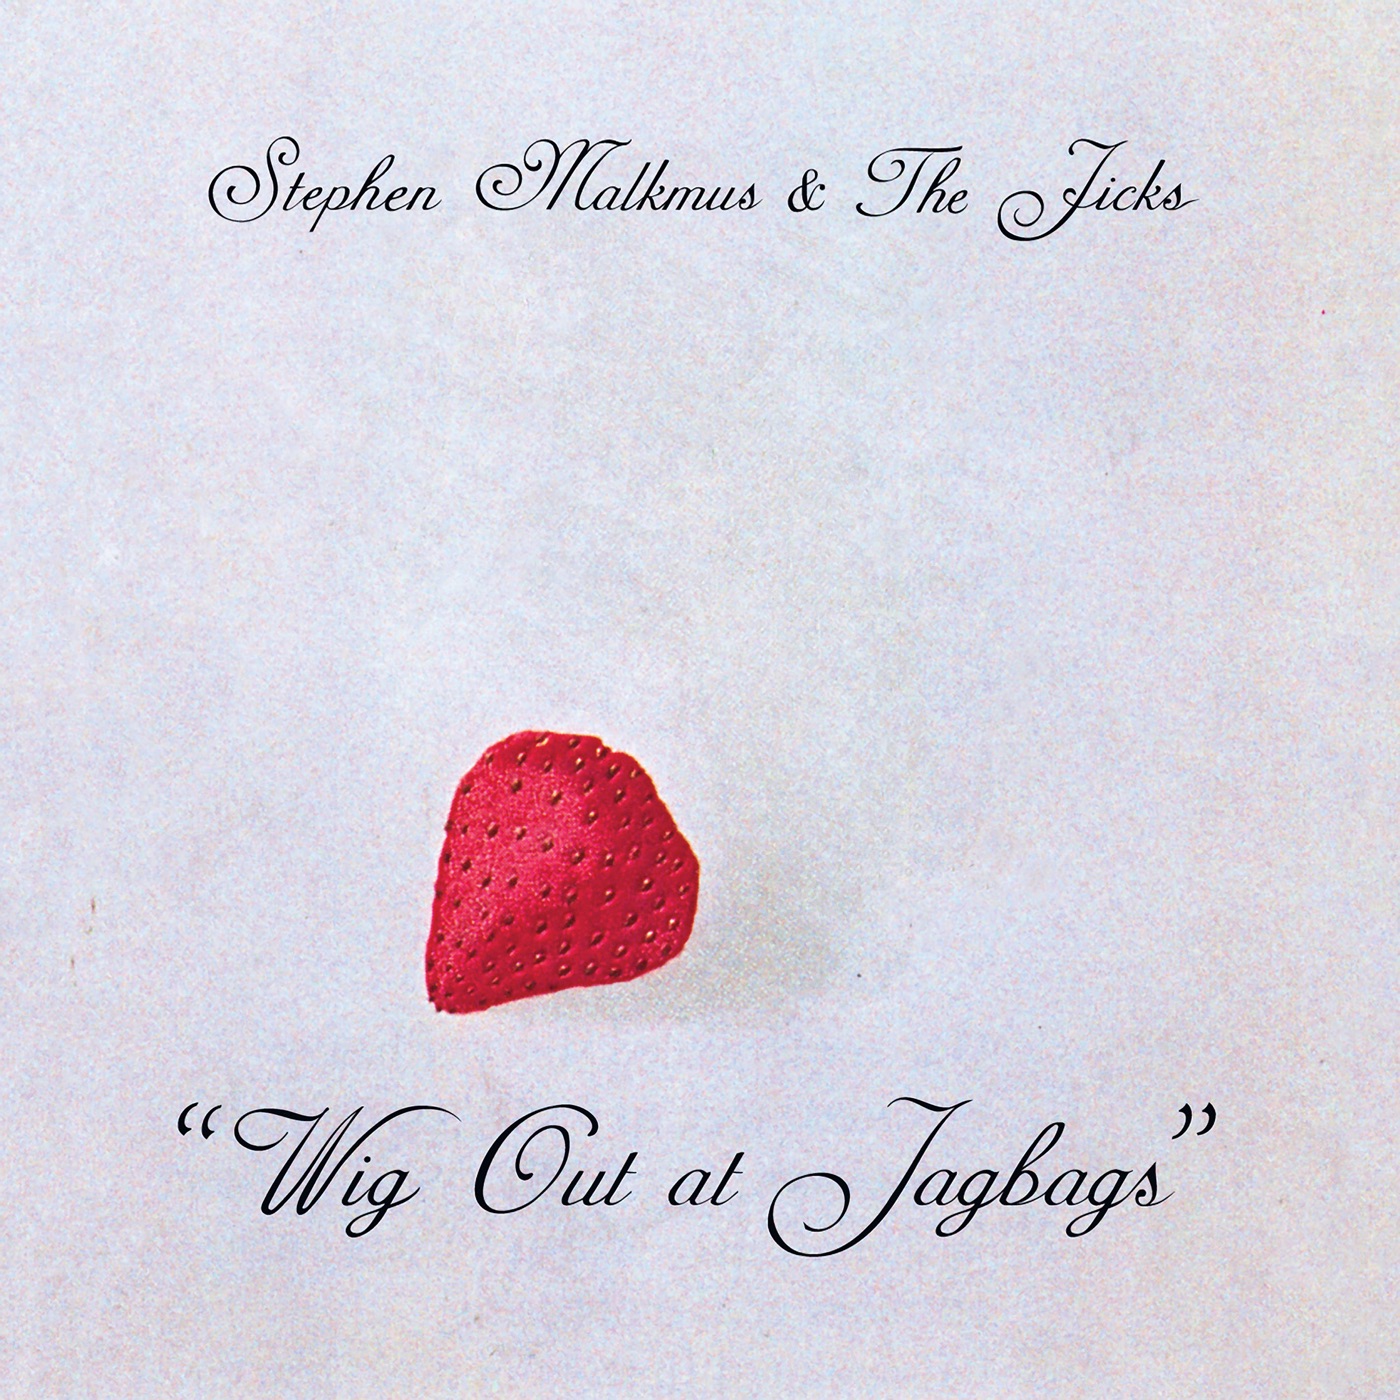 Wig Out at Jagbags by Stephen Malkmus & The Jicks